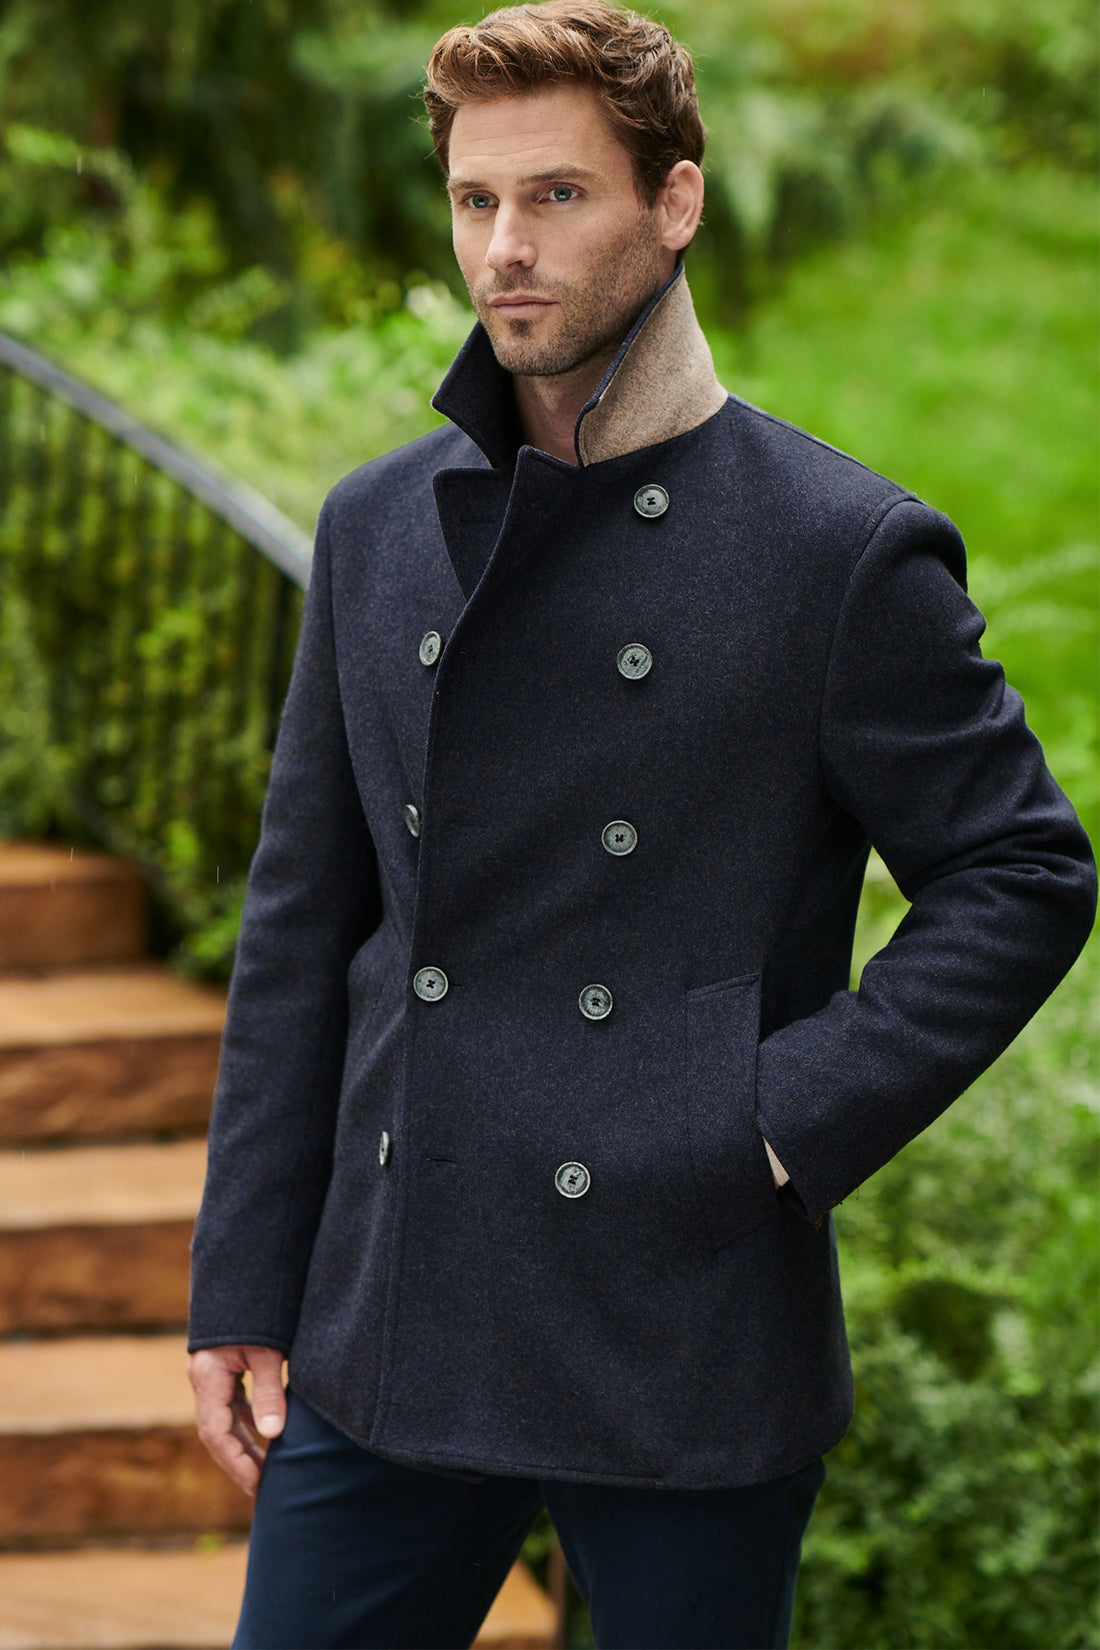 Men's double-breasted coat in blue wool with gold buttons